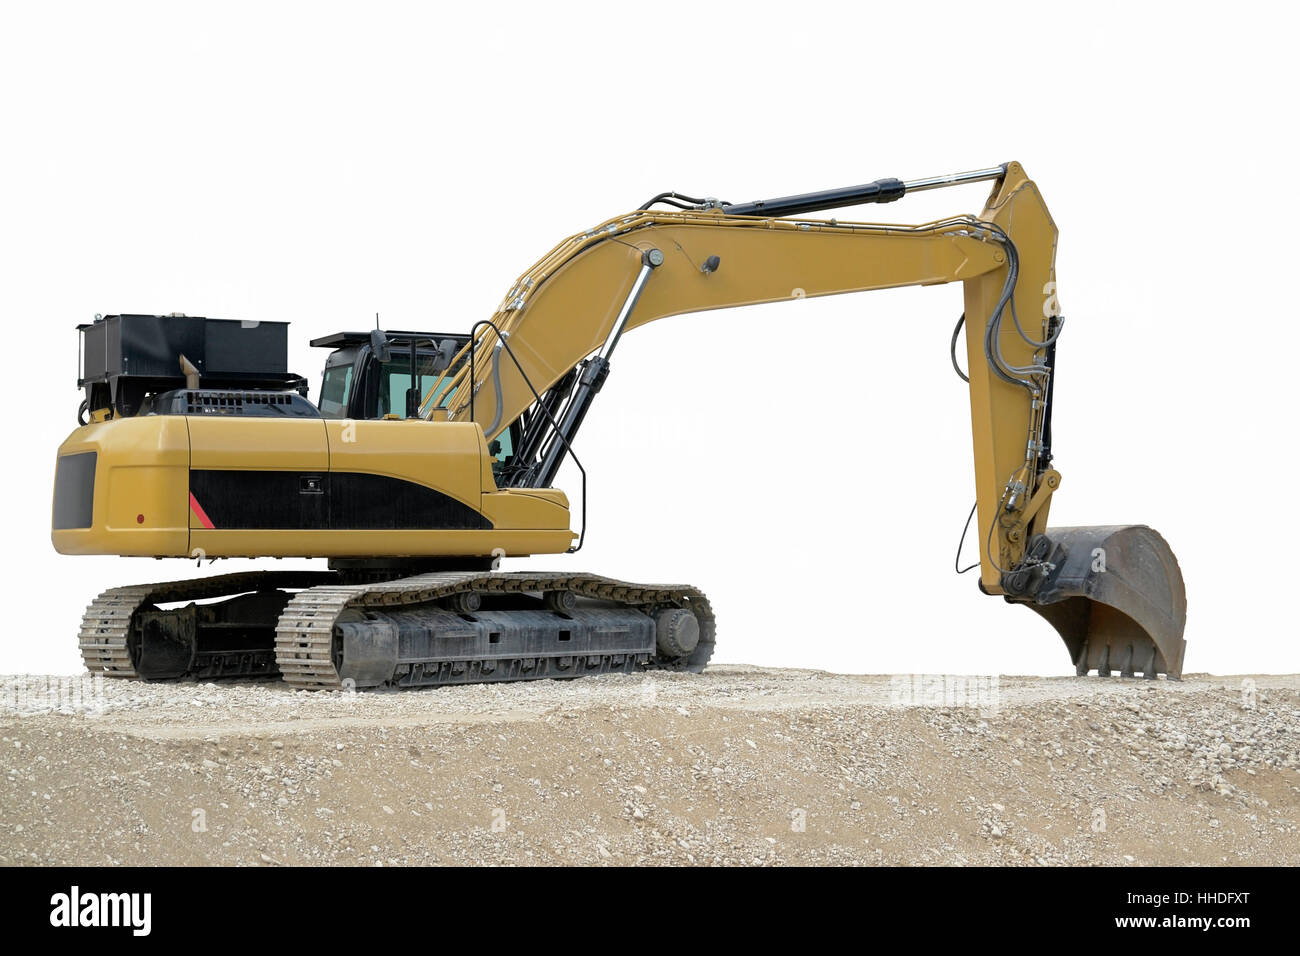 outdoor shot of a yellow resting digger in fade out background Stock Photo